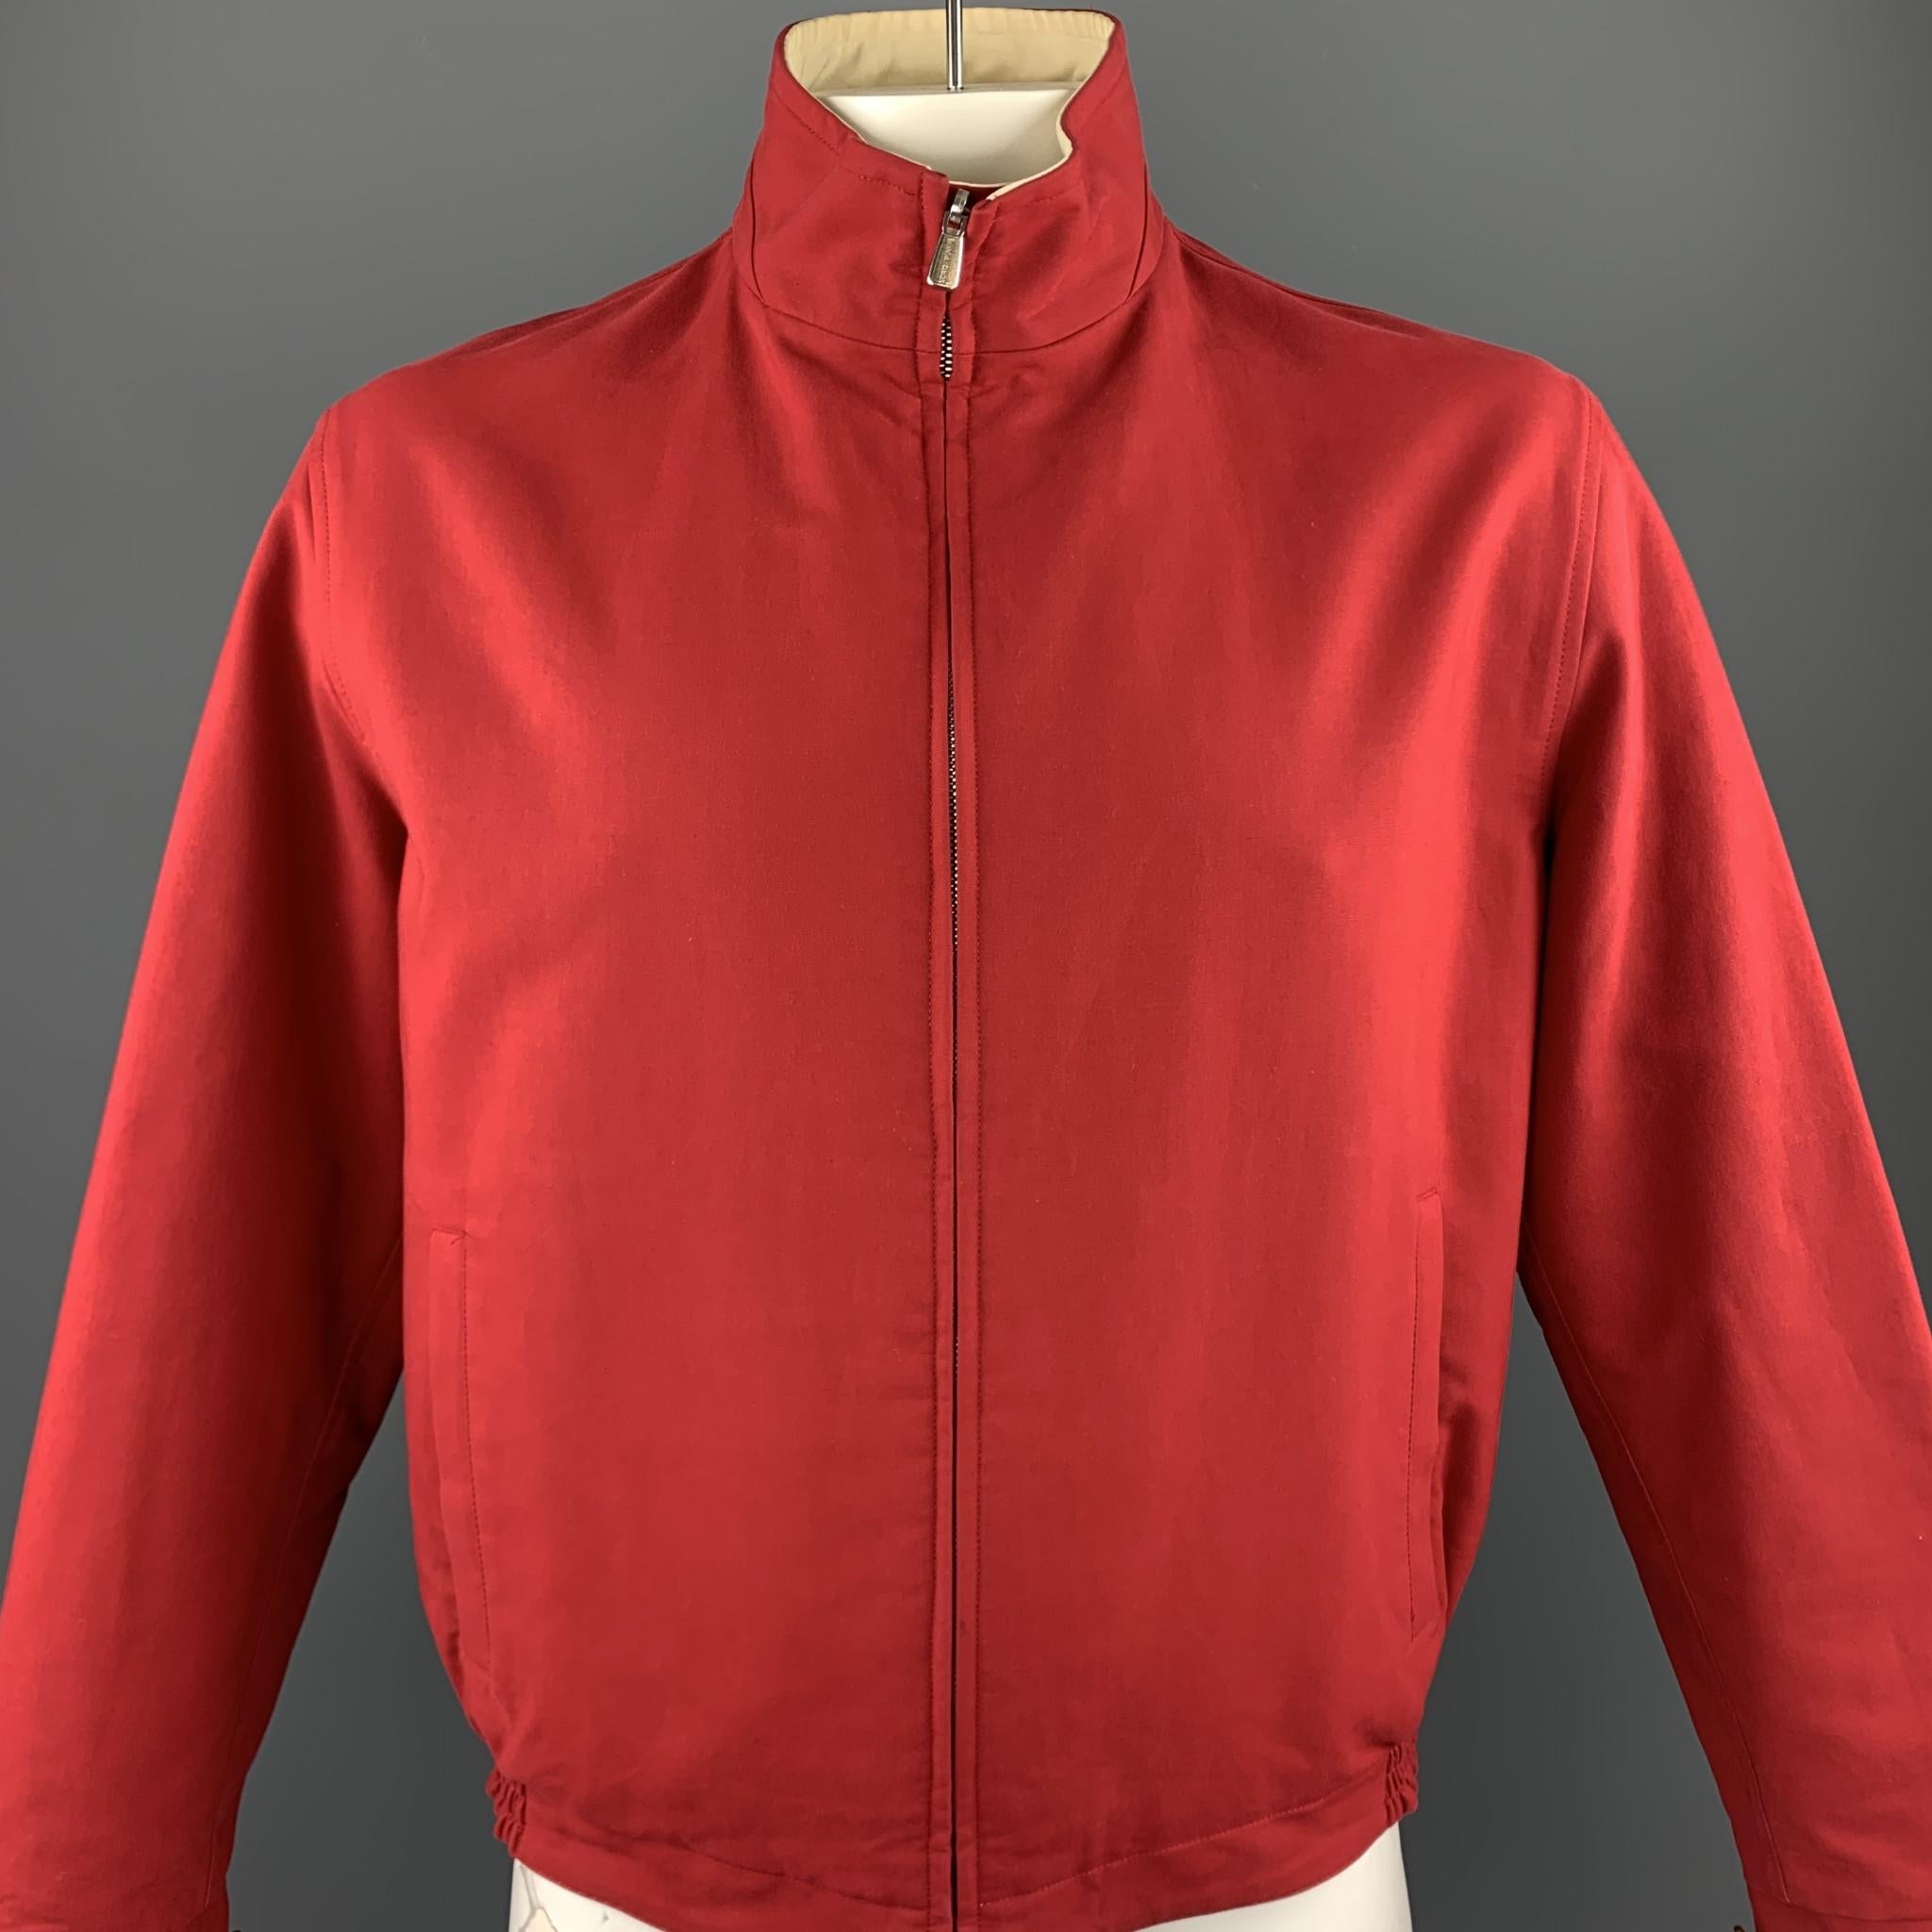 LORO PIANA jacket comes in a red & beige cotton featuring a reversible style, high collar, and a zip up closure. Made in Italy.

Good Pre-Owned Condition.
Marked: IT L

Measurements:

Shoulder: 19 in. 
Chest: 47 in. 
Sleeve: 25.5 in. 
Length: 26 in. 